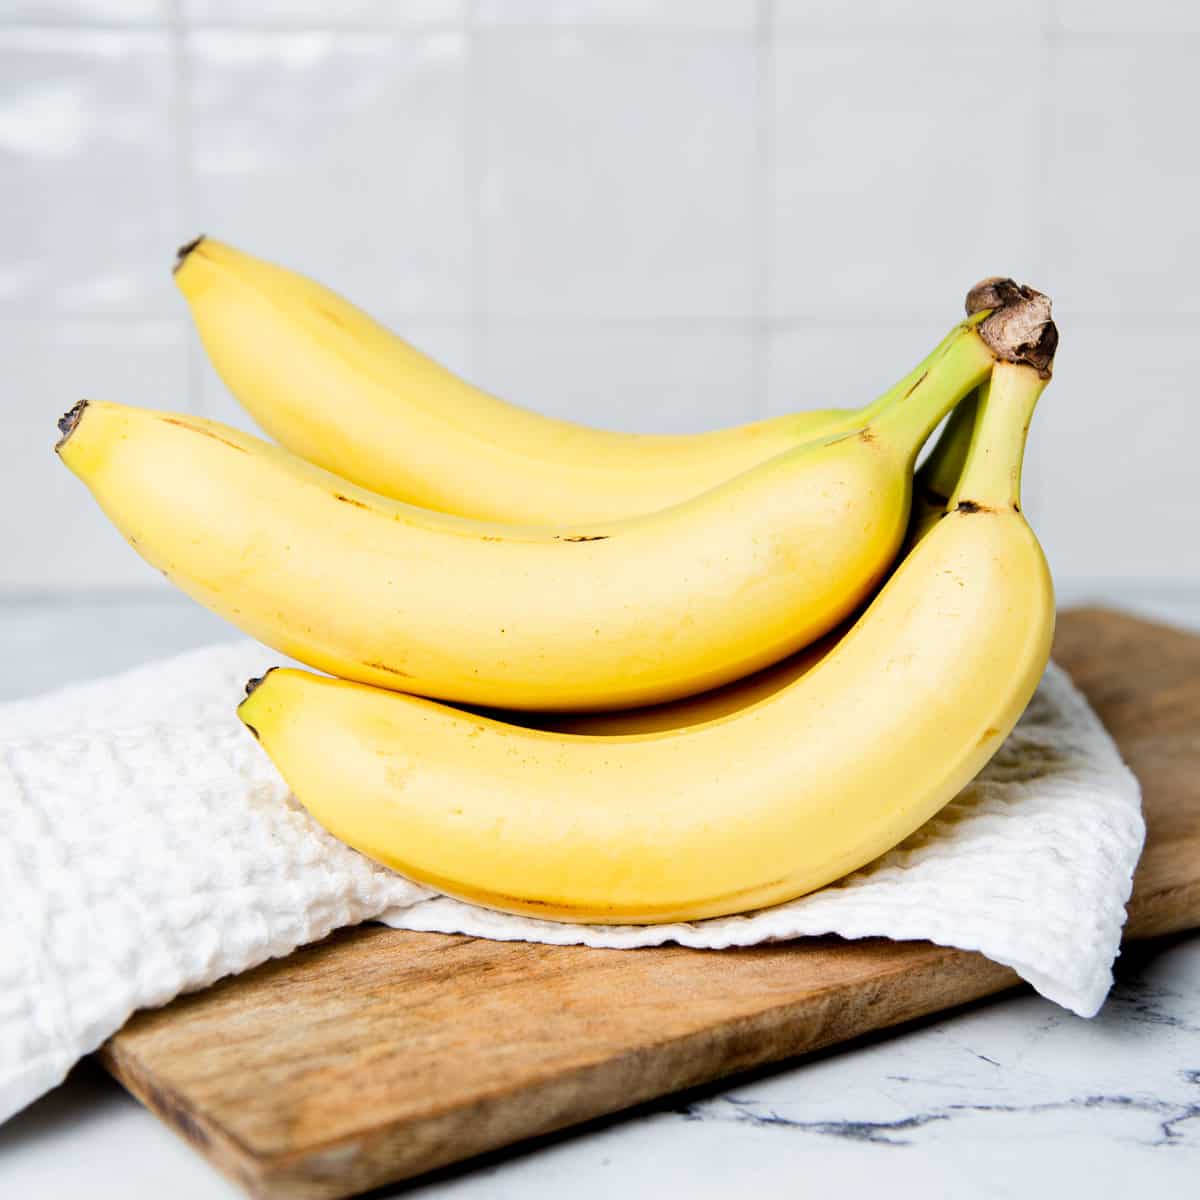 A bunch of bananas on a kitchen towel on a wooden breadboard.